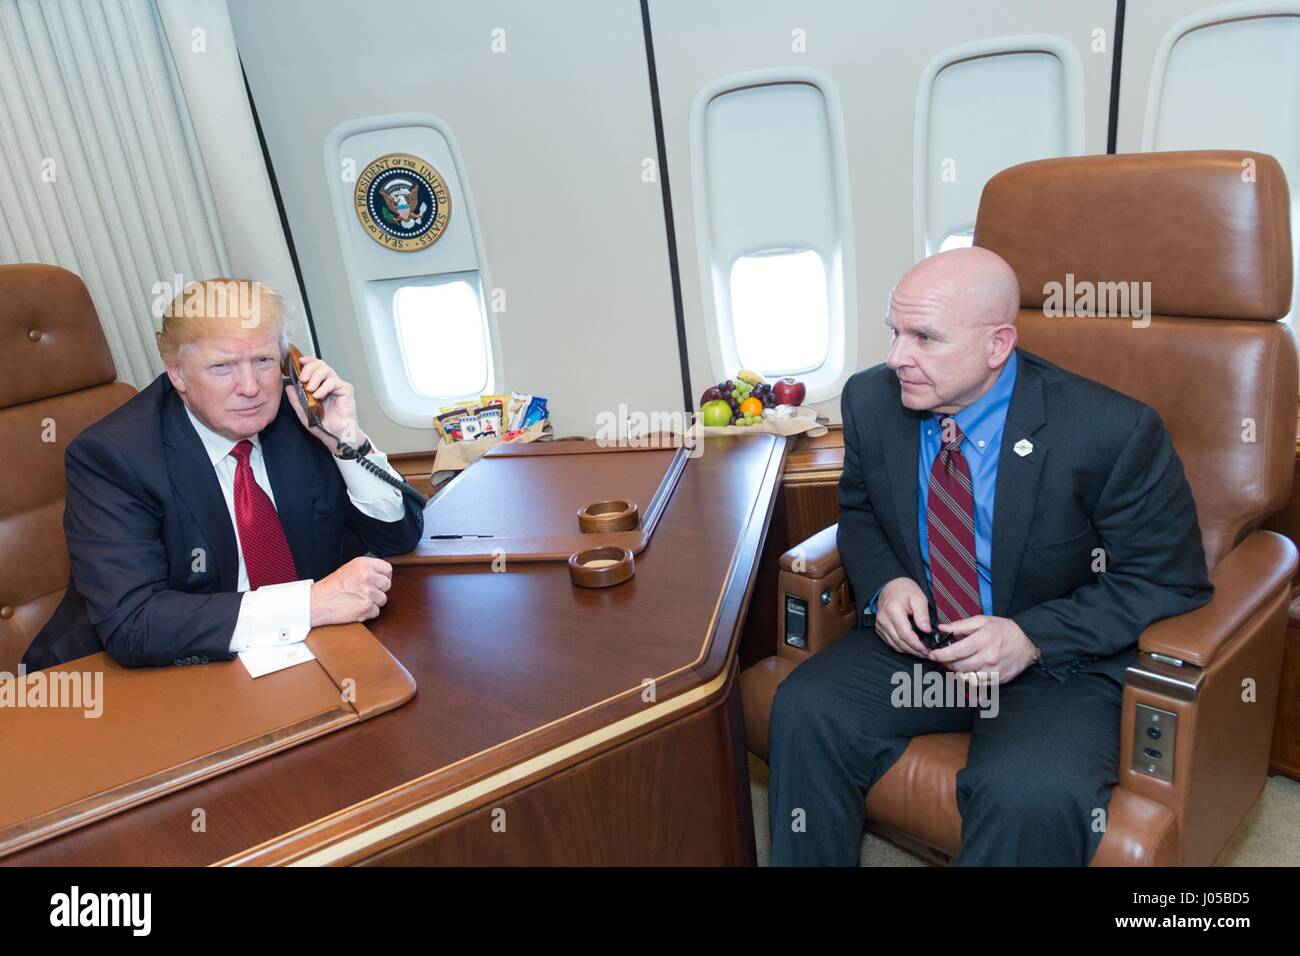 U.S President Donald Trump speaks by telephone with speaks with the commanding officers of the guided-missile destroyers USS Porter and USS Ross from aboard Air Force One as National Security Advisor H.R. McMaster look on April 9, 2017 in flight to Washington, DC. The president thanked the commanders and their personnel for successfully executing the strike against the Shayrat Air Base in Syria. Stock Photo